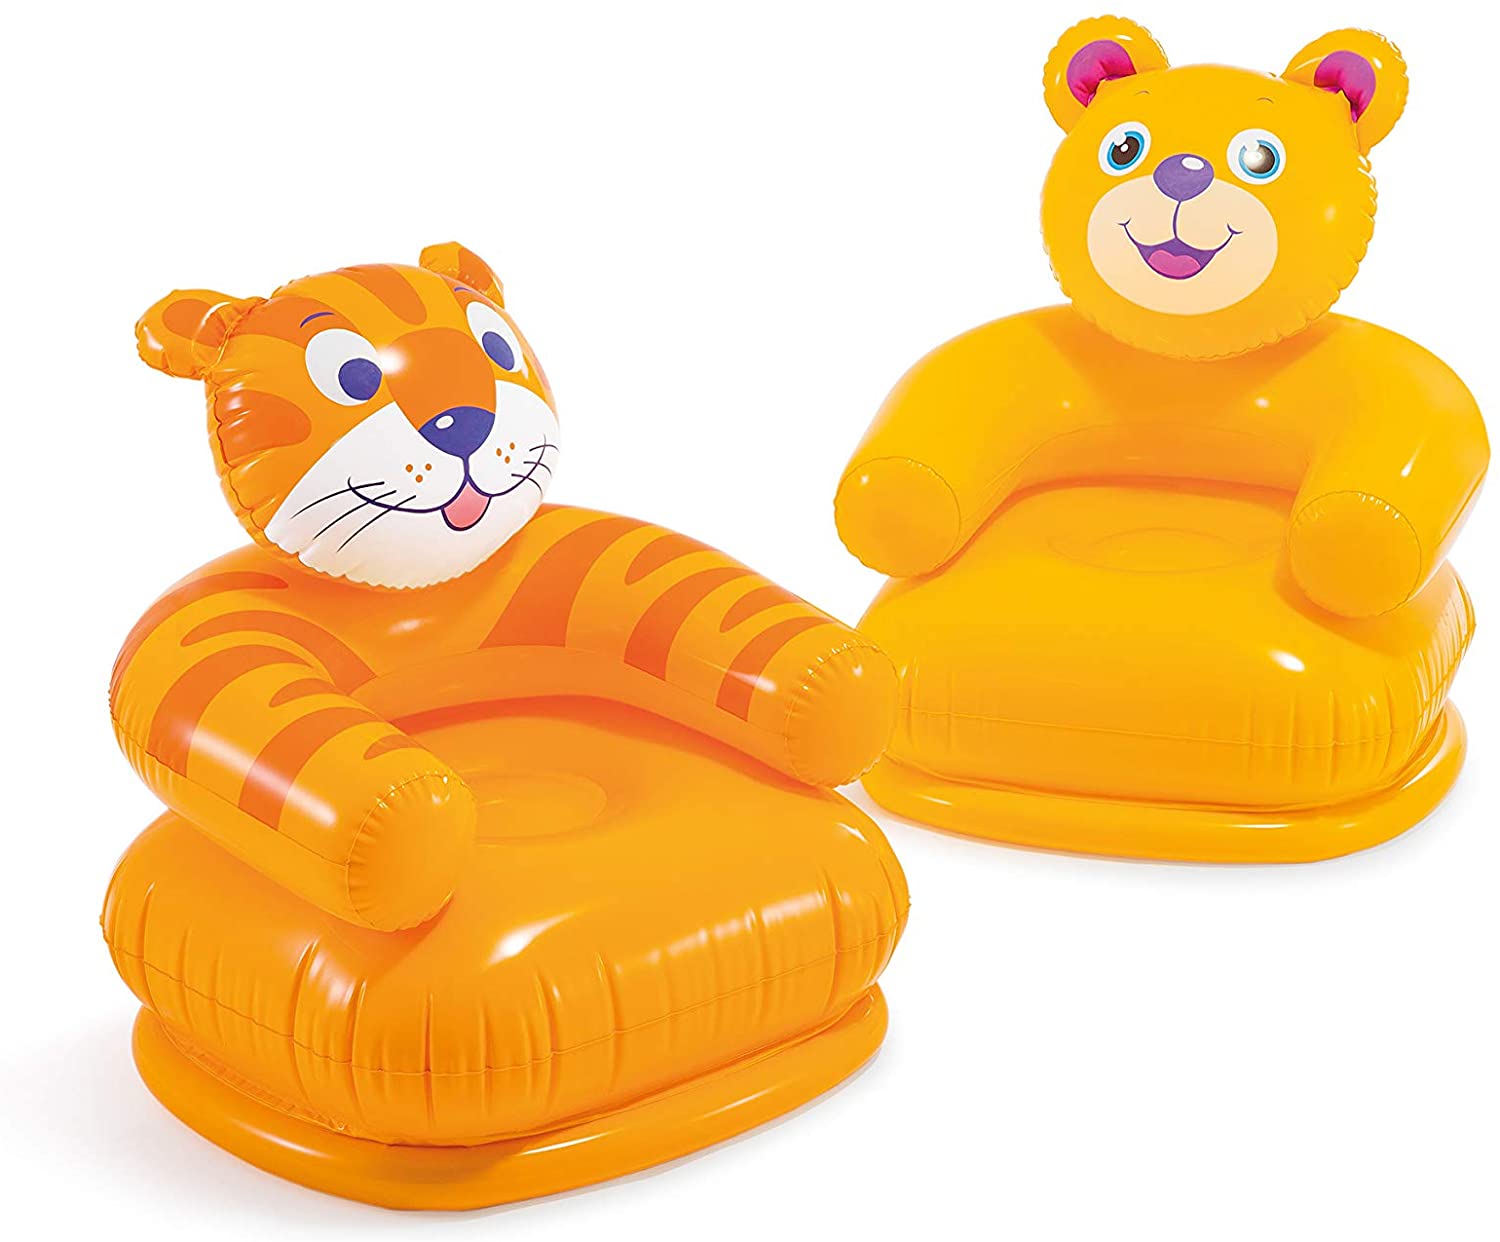 Intex 68556 Inflatable Happy Animal Chair, Assorted Color